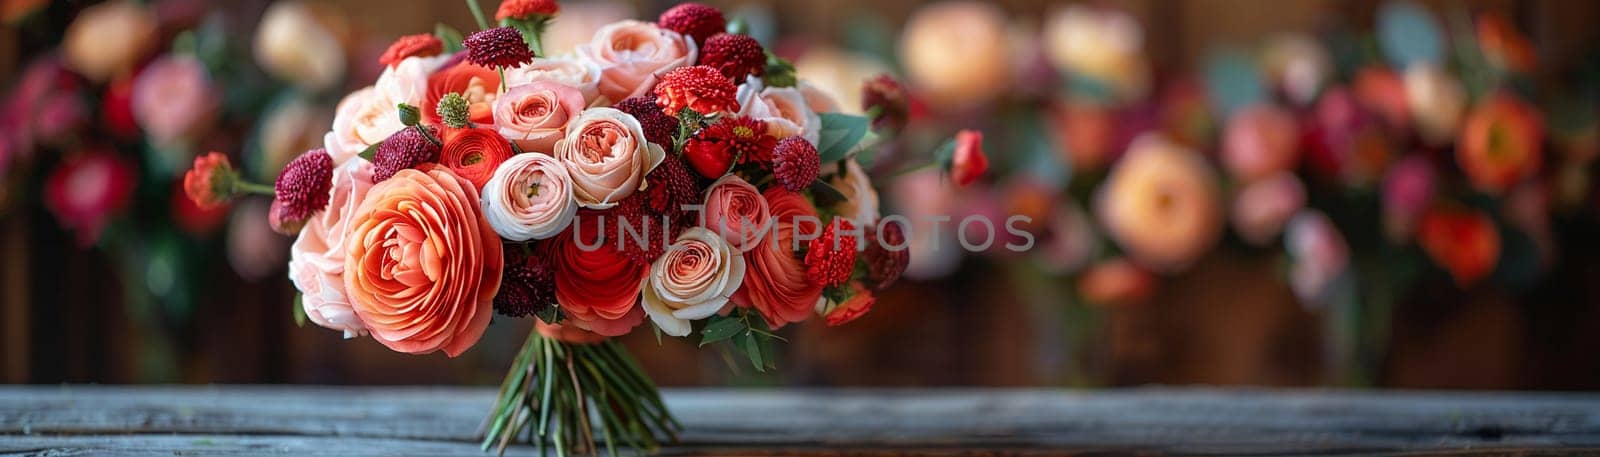 Florist Arranges Stunning Bouquets for Corporate Events, Beautiful floral arrangements are meticulously crafted for upscale business gatherings.